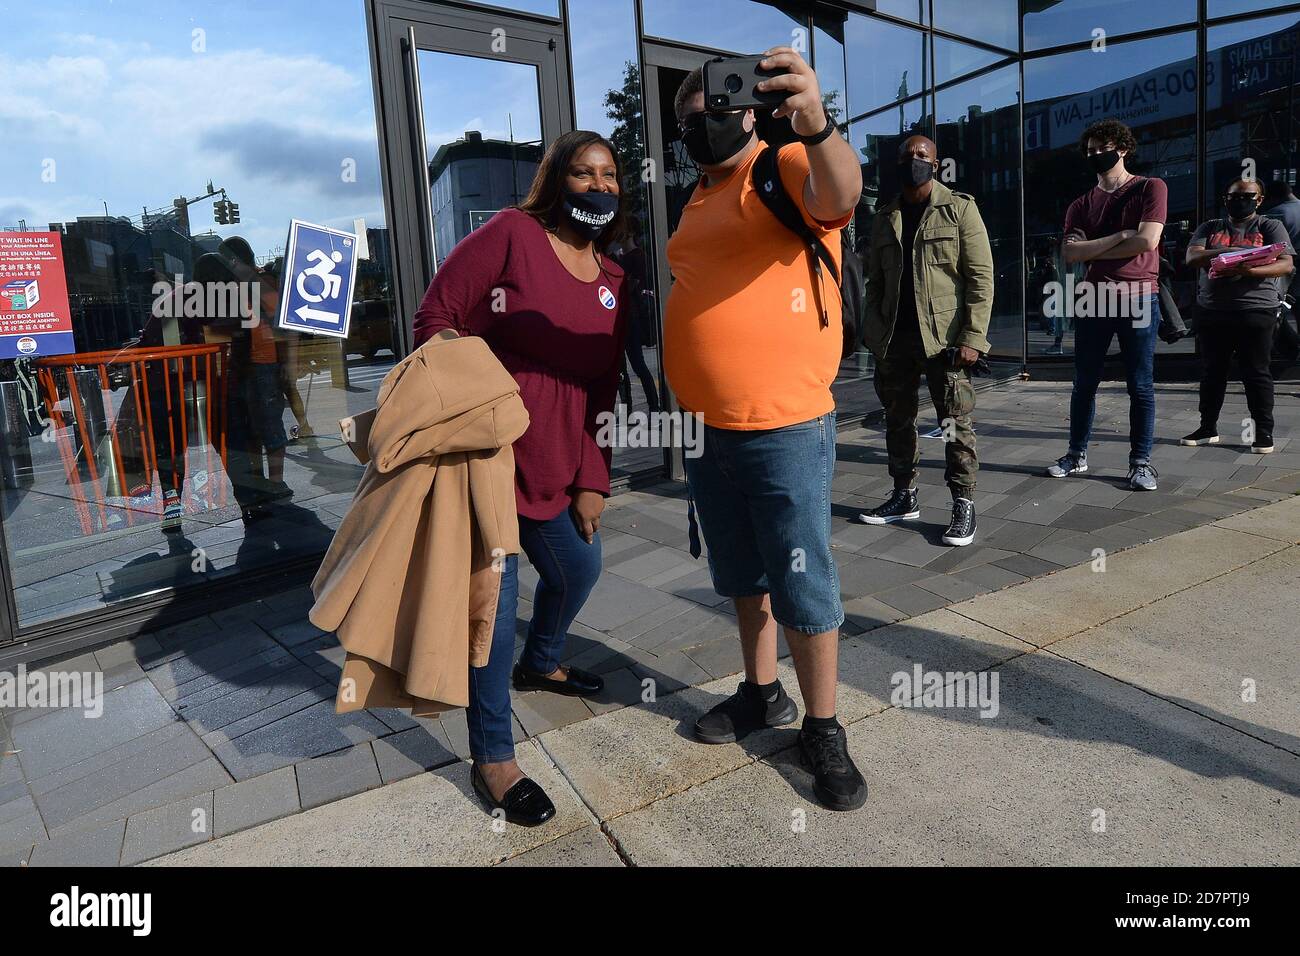 New York City, USA. 24th Oct, 2020. Attorney General of New York Letitia James (l) takes a selfie with a voter waiting in line outside the Barclays Center on the first day of early voting for the 2020 Presidential elections, in the New York City borough of Brooklyn, NY, October 24, 2020. In a deal reached with the NBA, sports arenas such as the Barclays Center will be used as polling sites, one of 88 early voting ballot casting sites, this the first time in history New York participates in early voting. (Anthony Behar/Sipa USA) Credit: Sipa USA/Alamy Live News Stock Photo